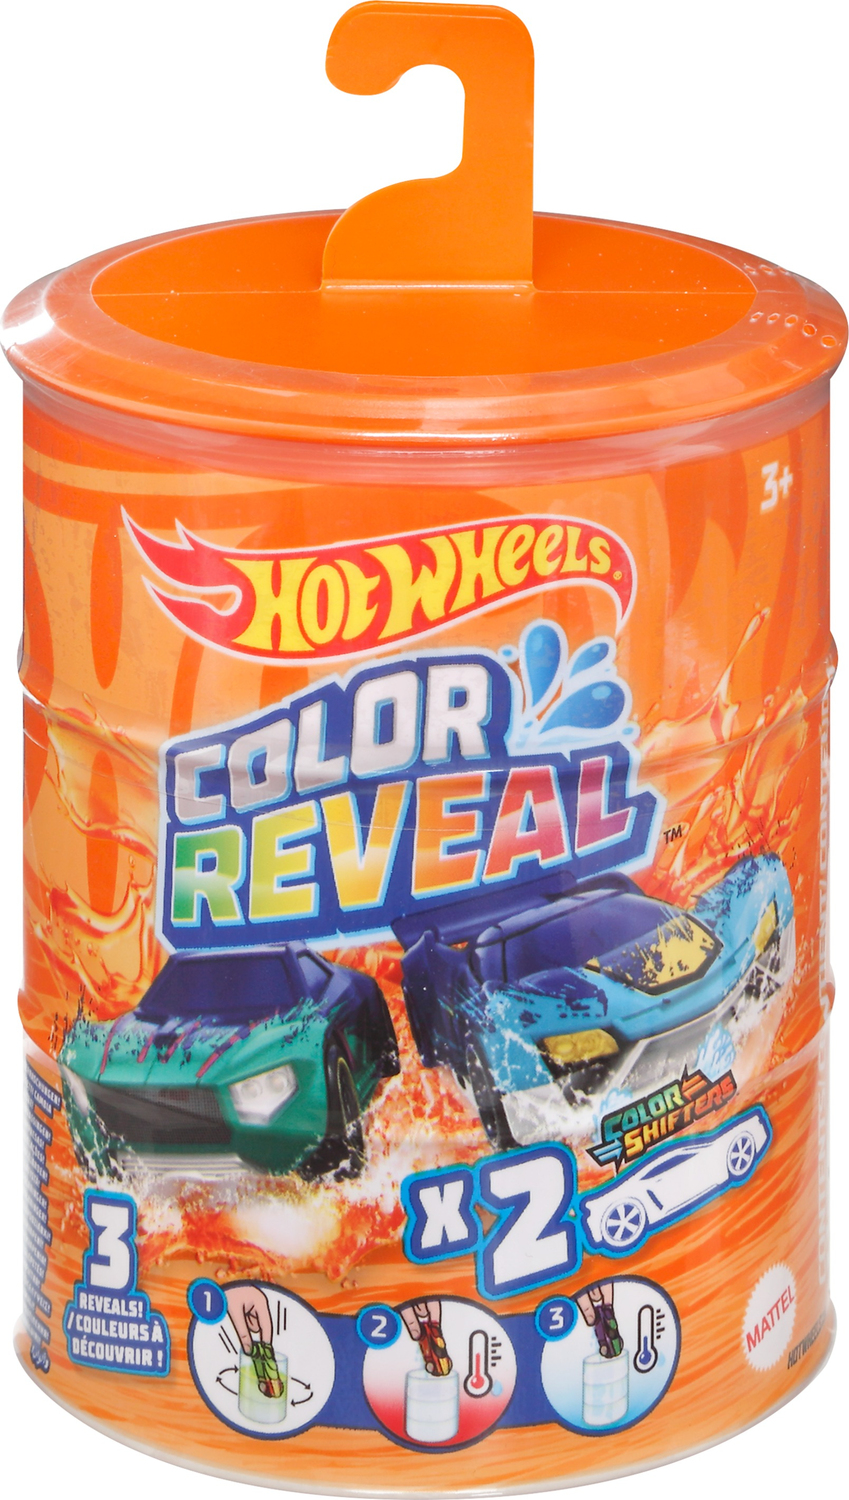 Hot Wheels Color Reveal toy vehicle - The Toy Box Hanover